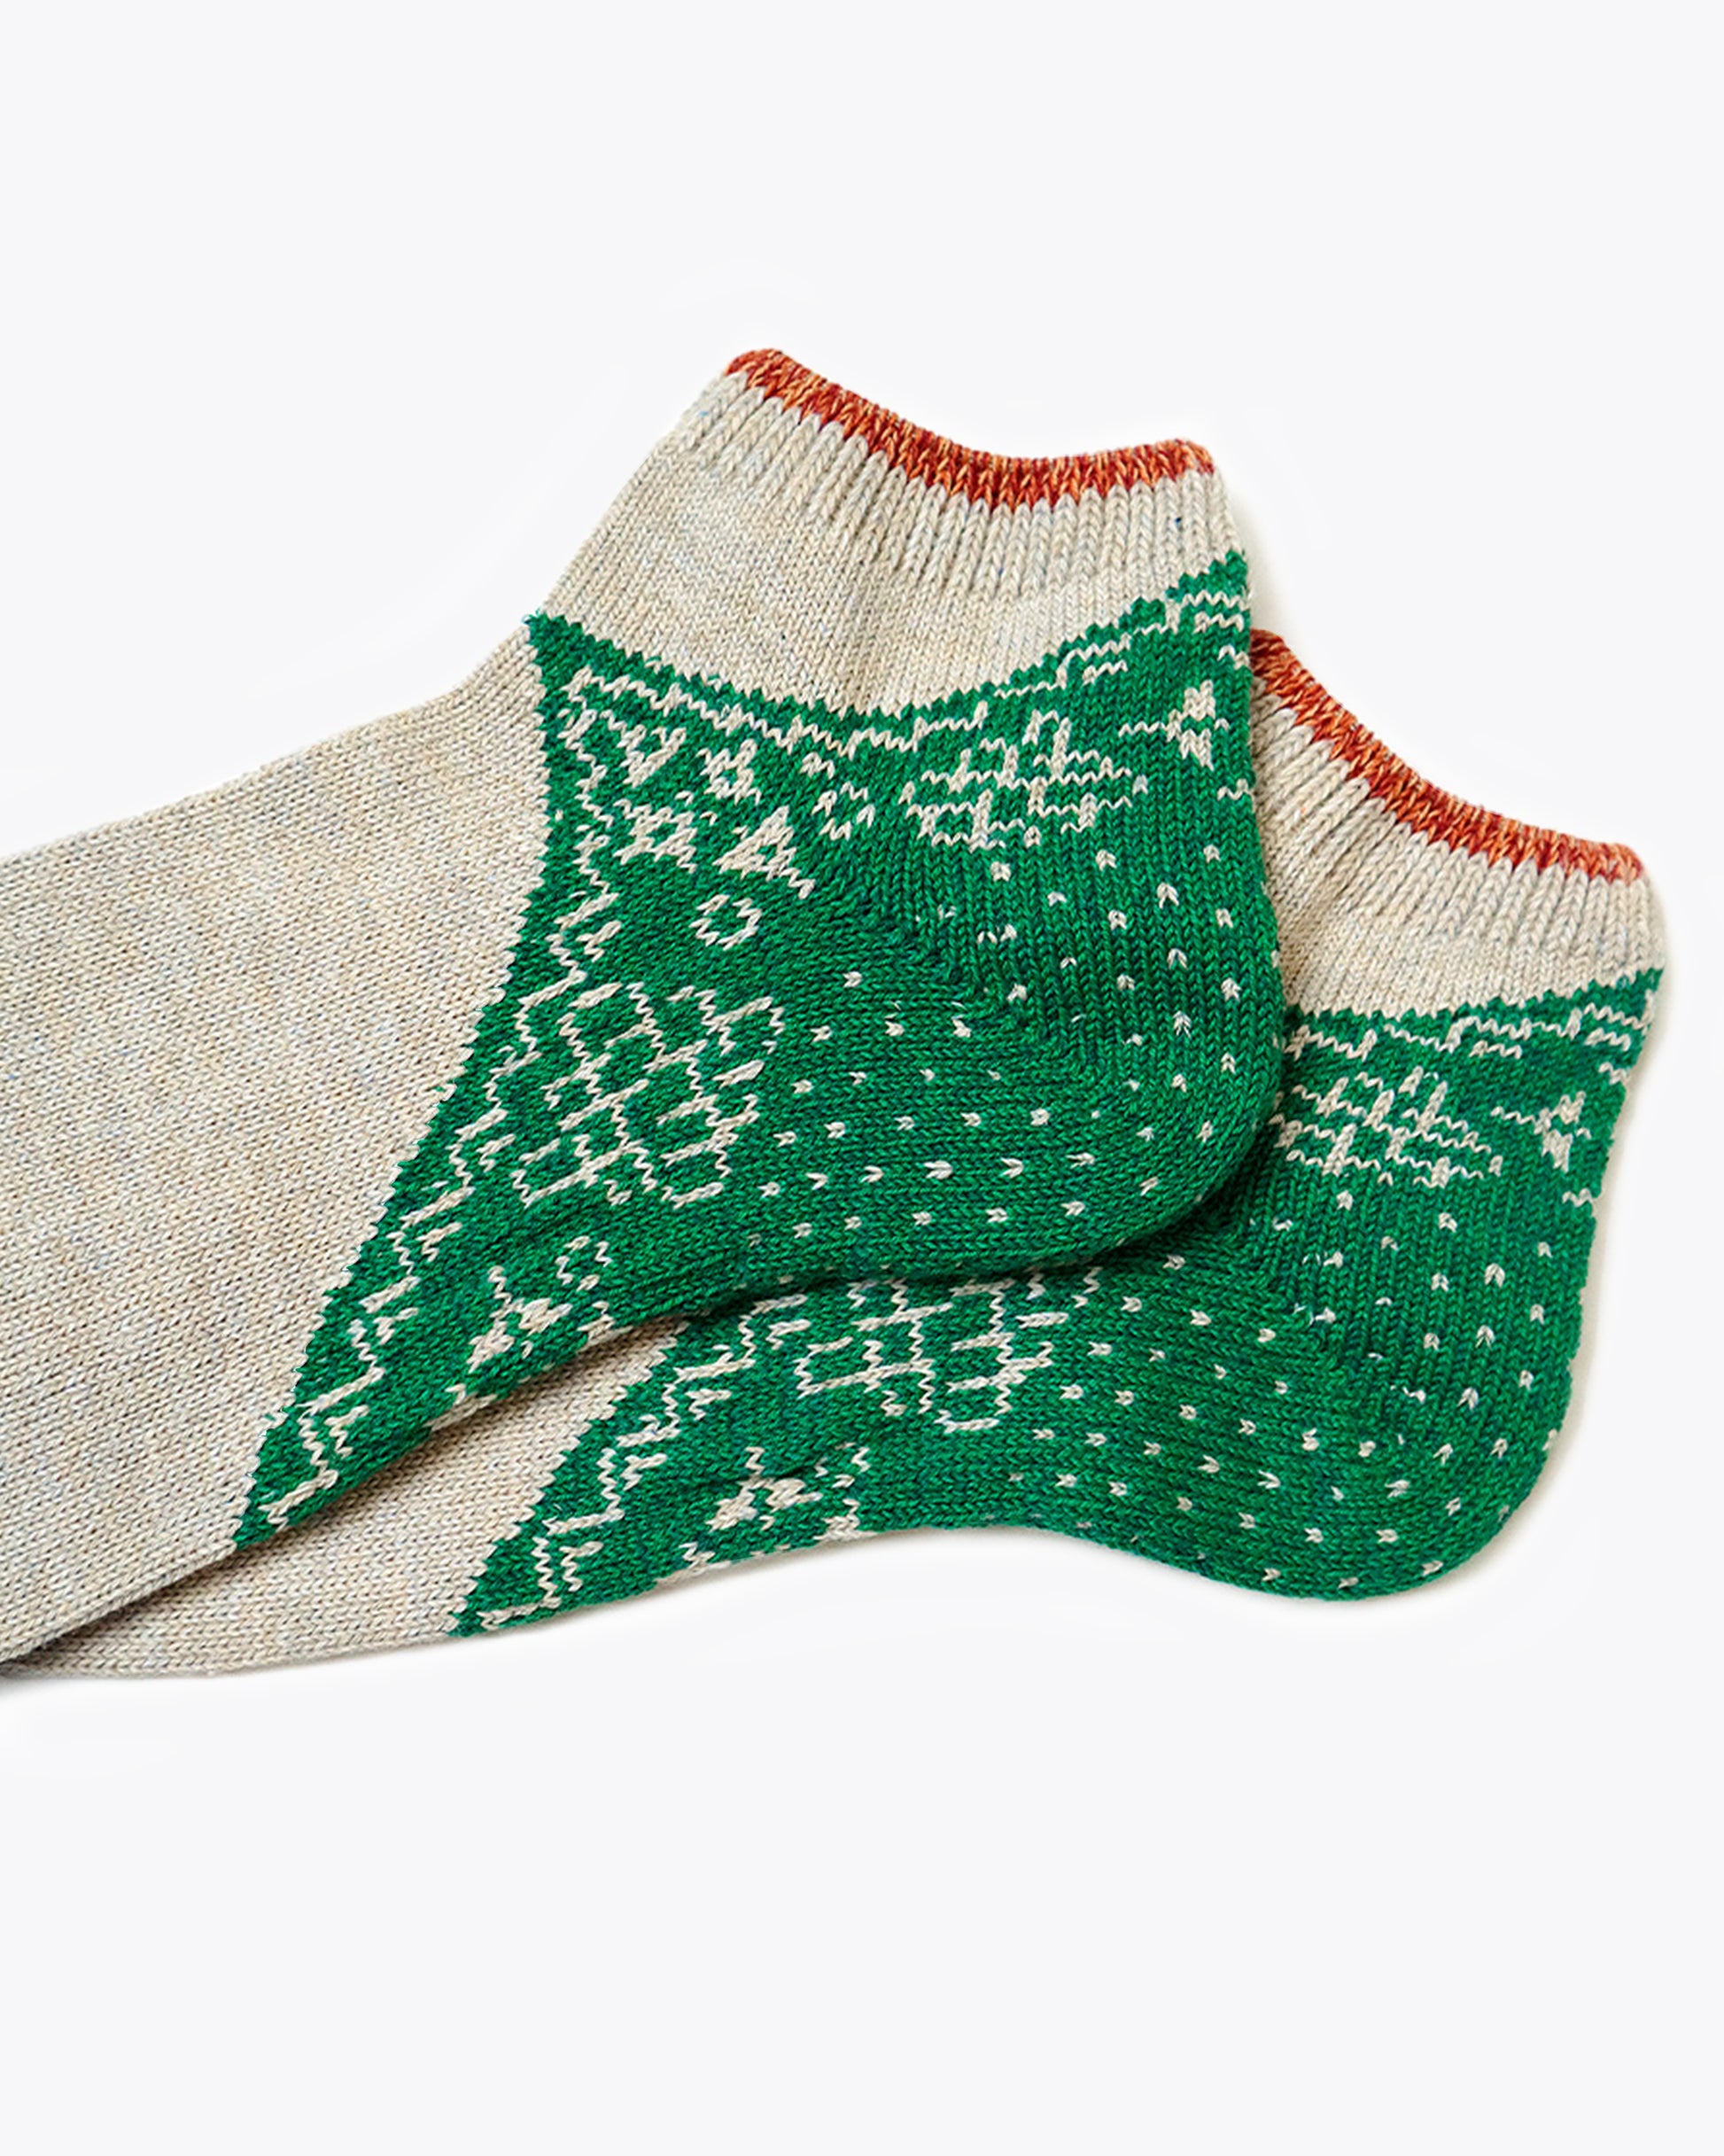 A pair of moderately thick ankle socks with an eye-catching bandana motif on the heel.